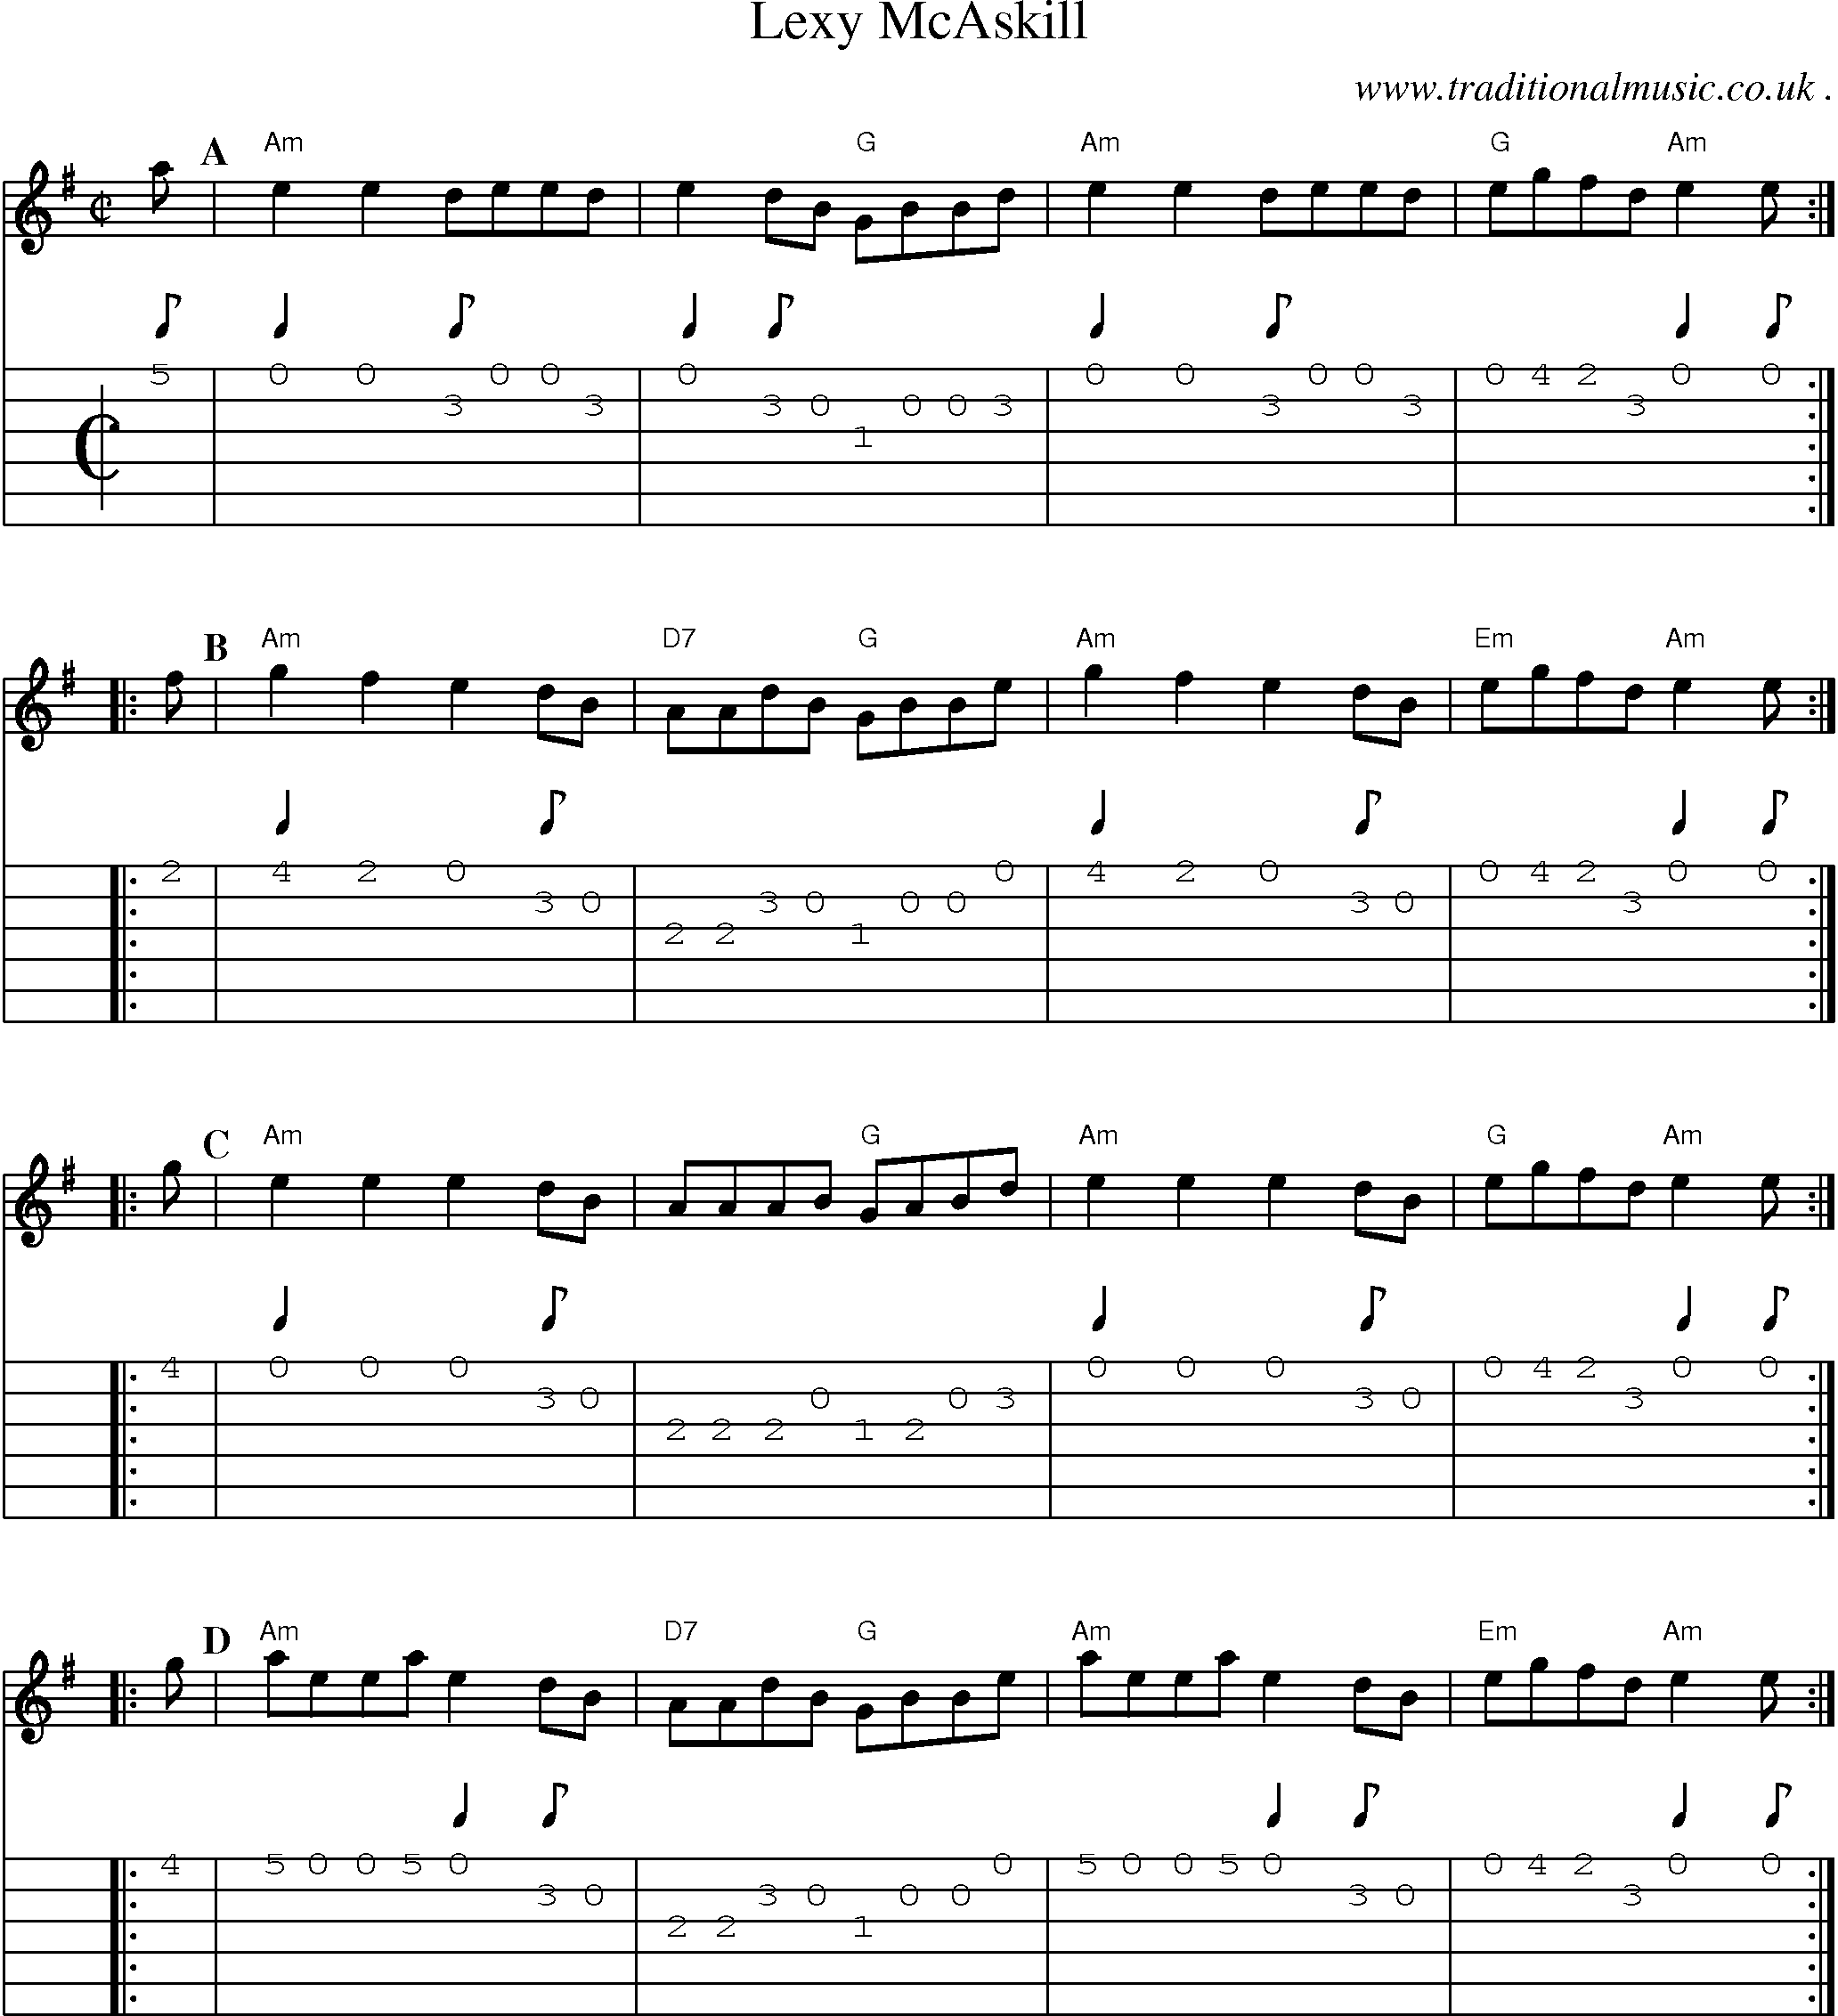 Sheet-music  score, Chords and Guitar Tabs for Lexy Mcaskill